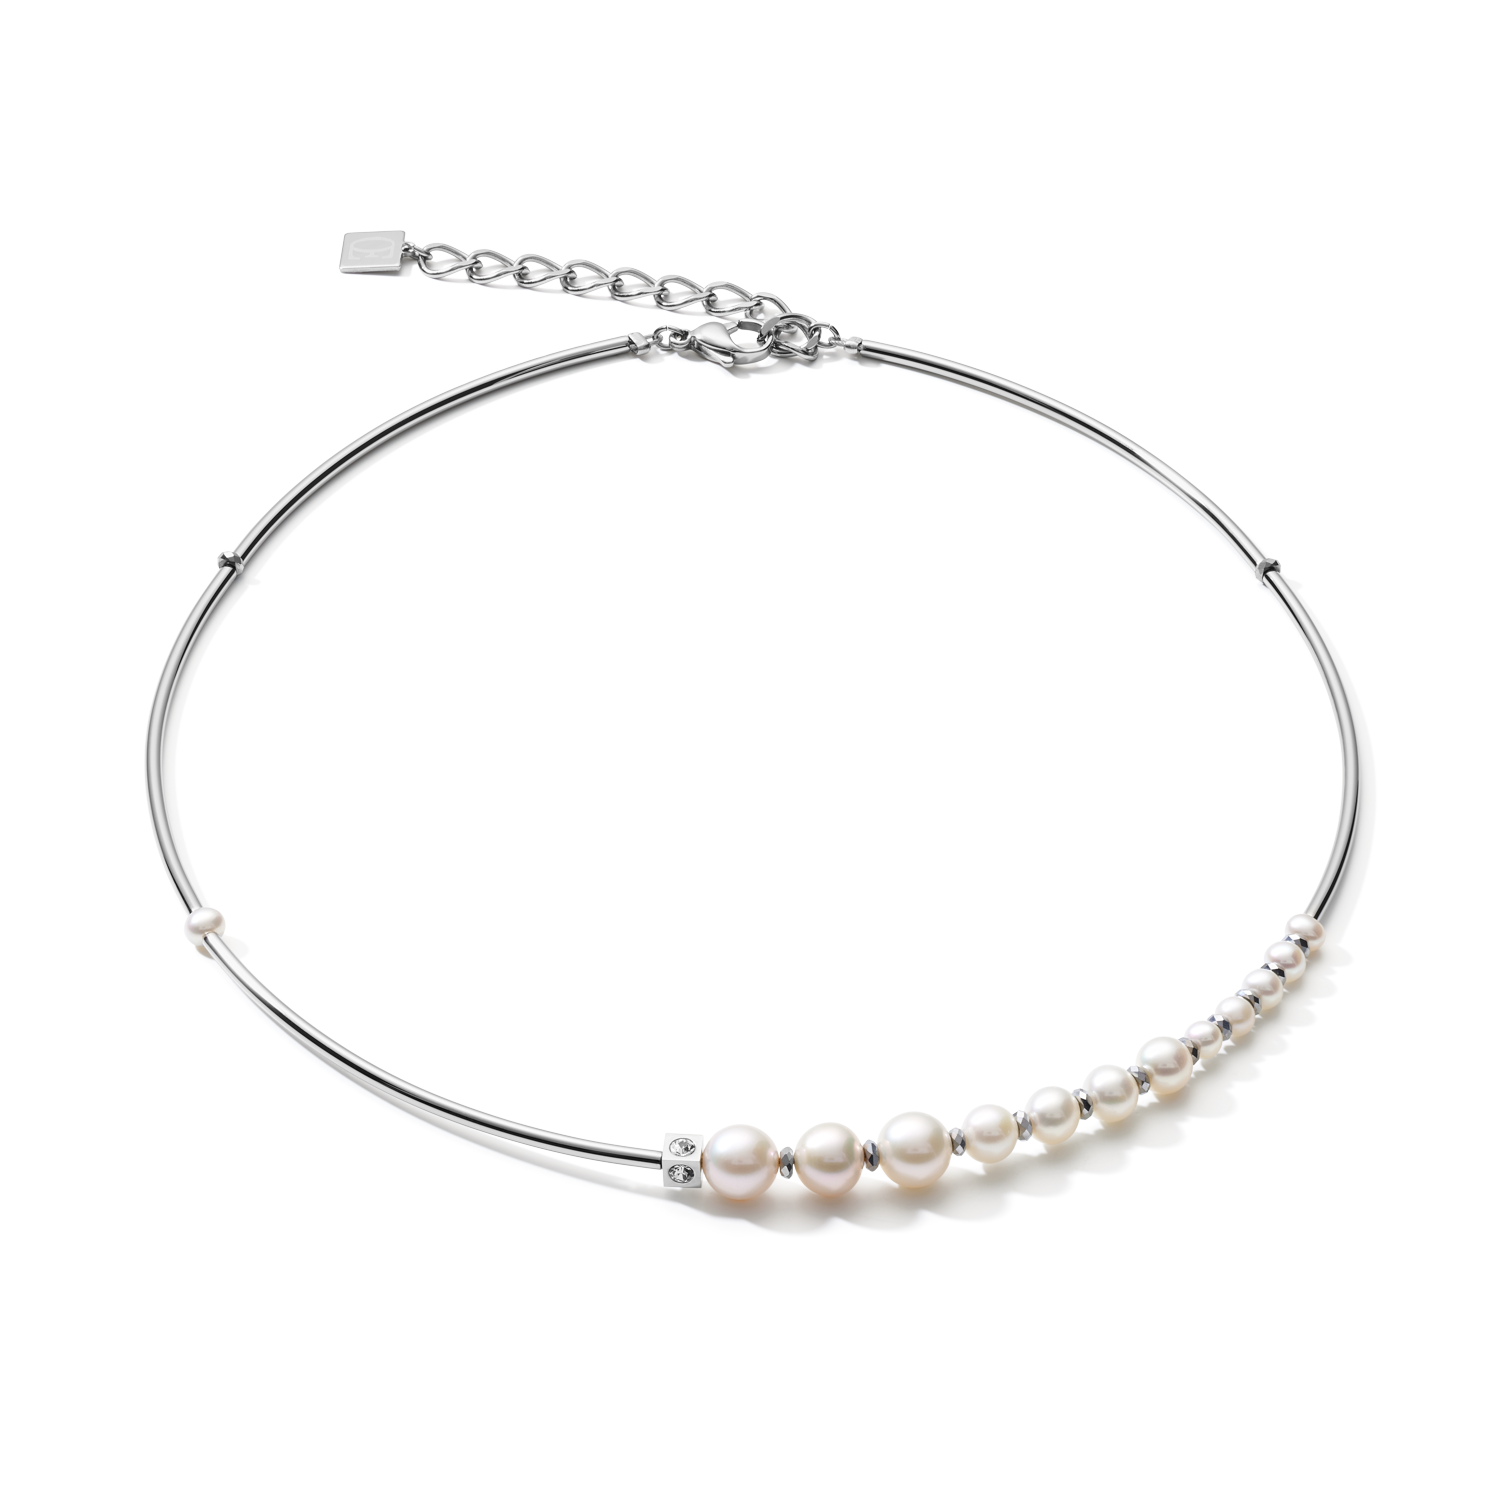 Necklace Asymmetry freshwater pearls & stainless steel white-silver